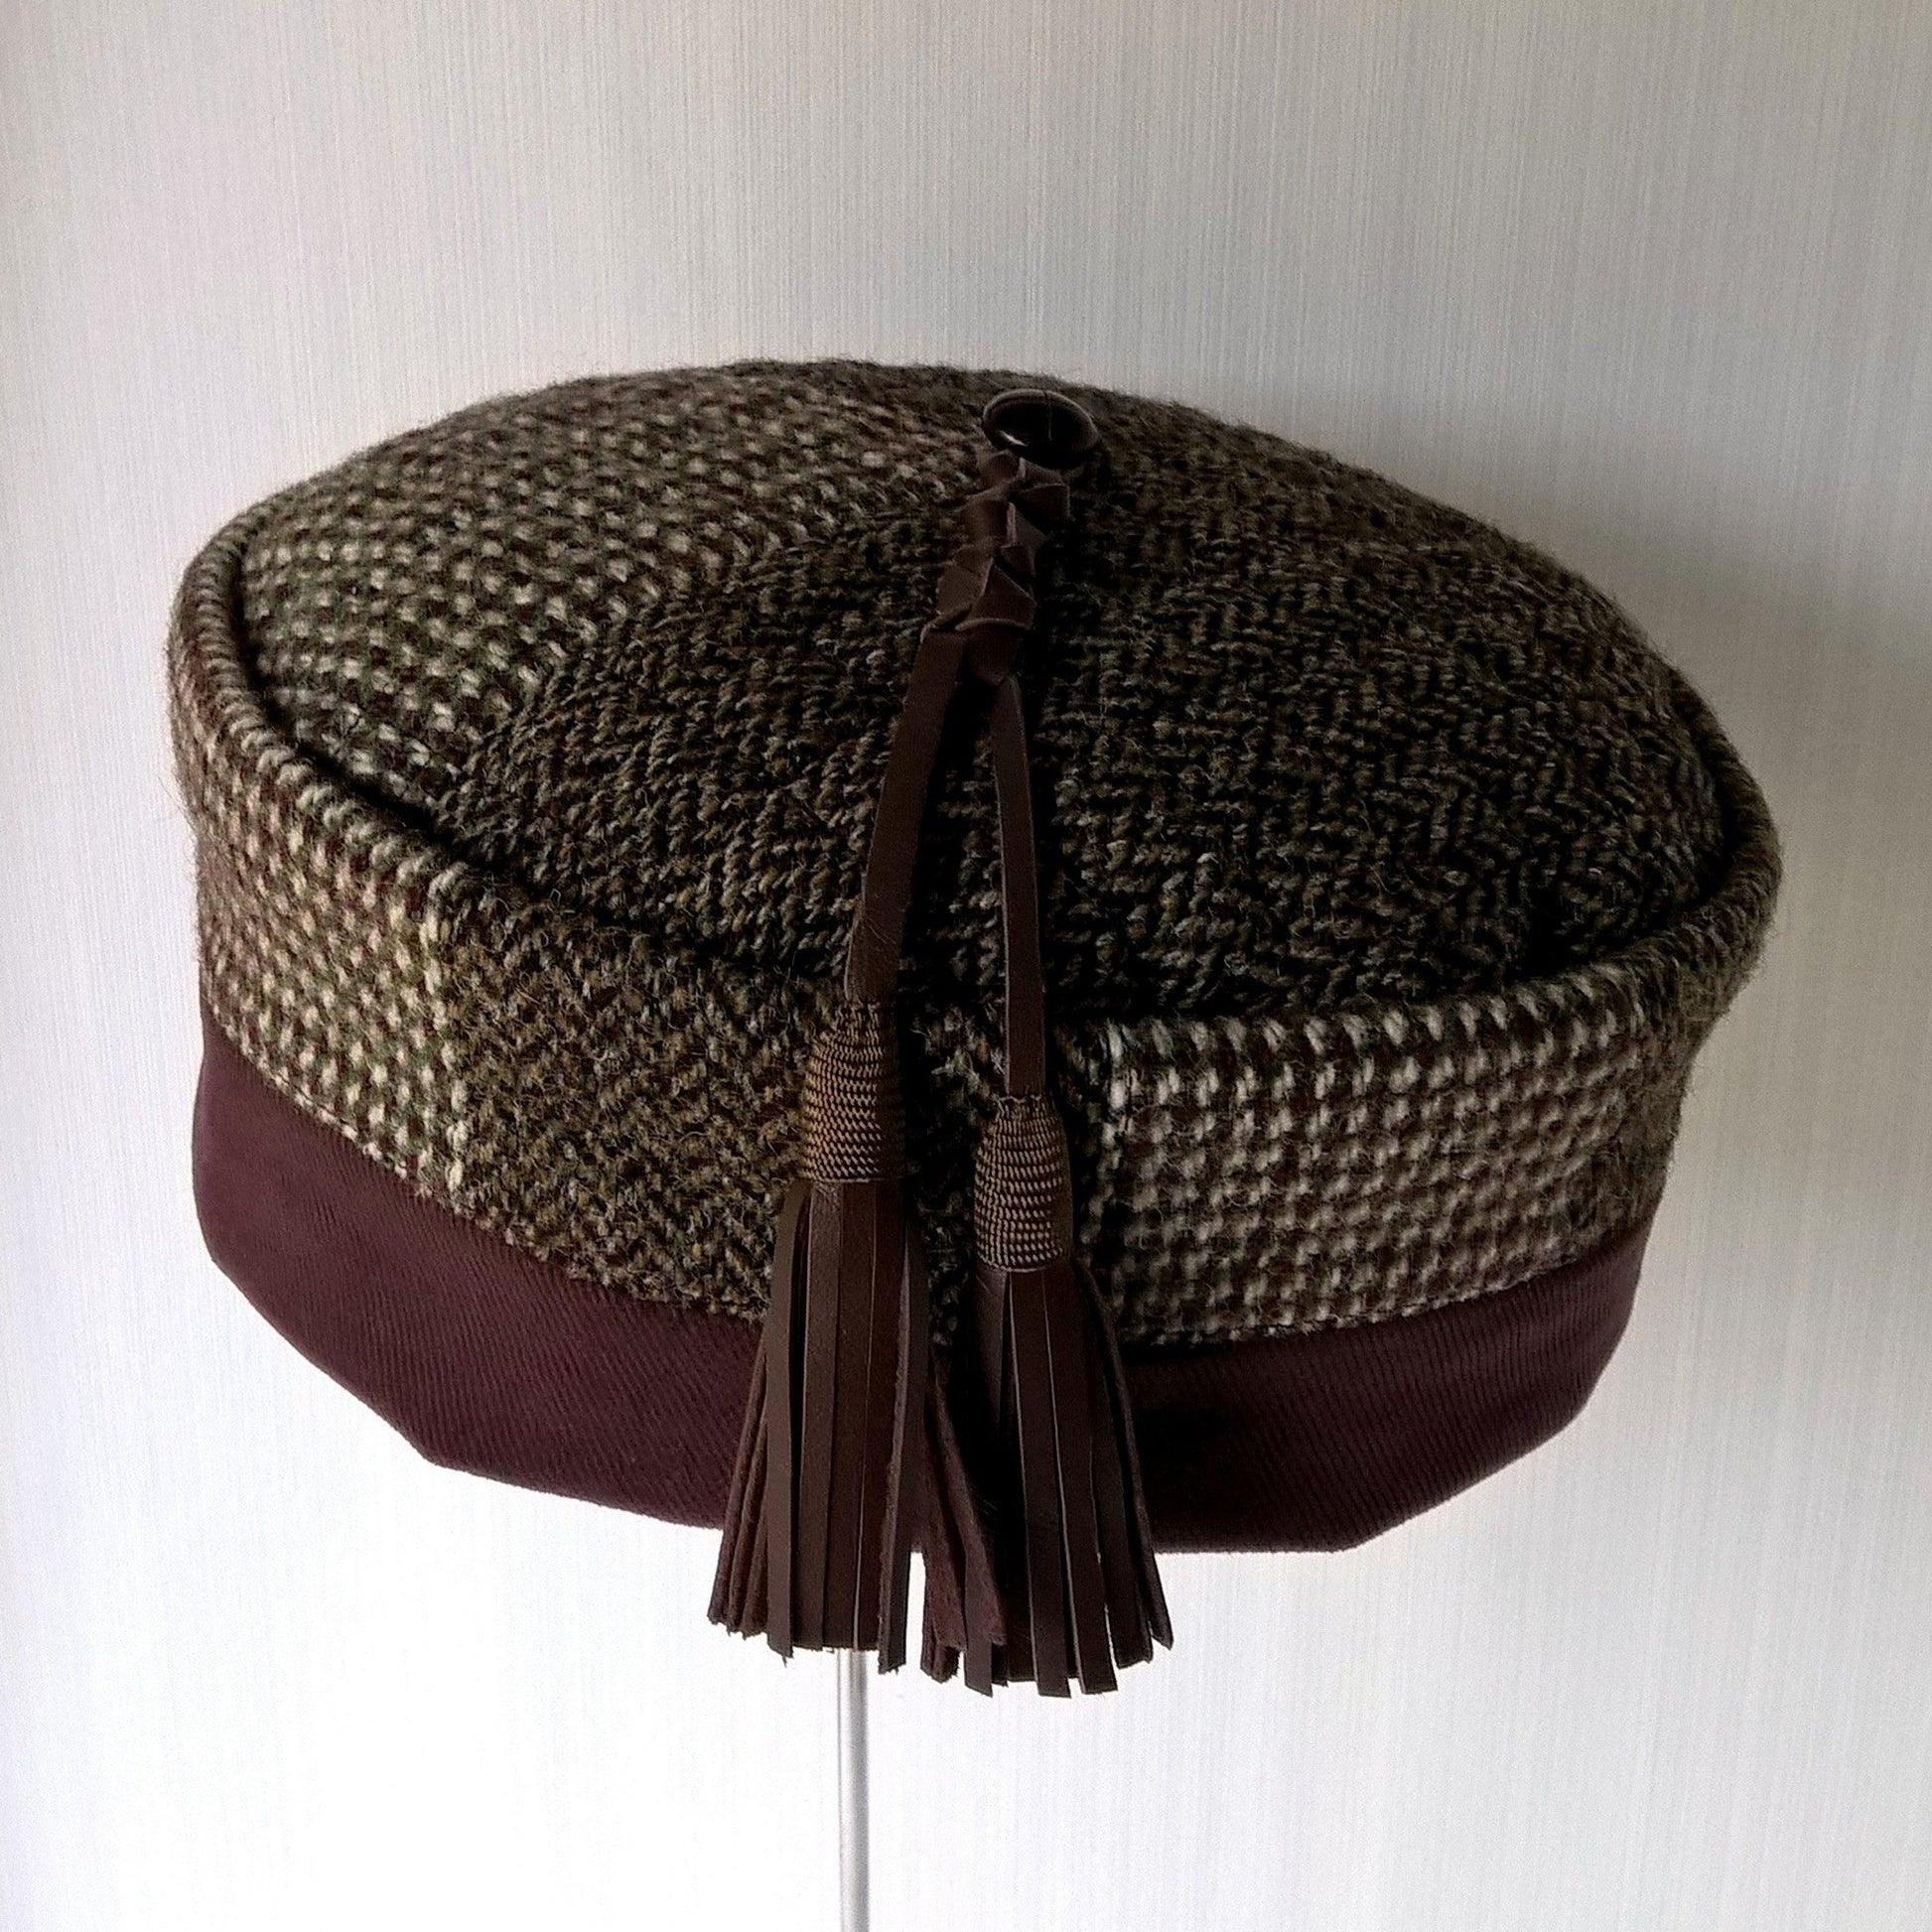 Smoking cap crafted from vintage Harris Tweed jackets in patchwork design with leather tassel